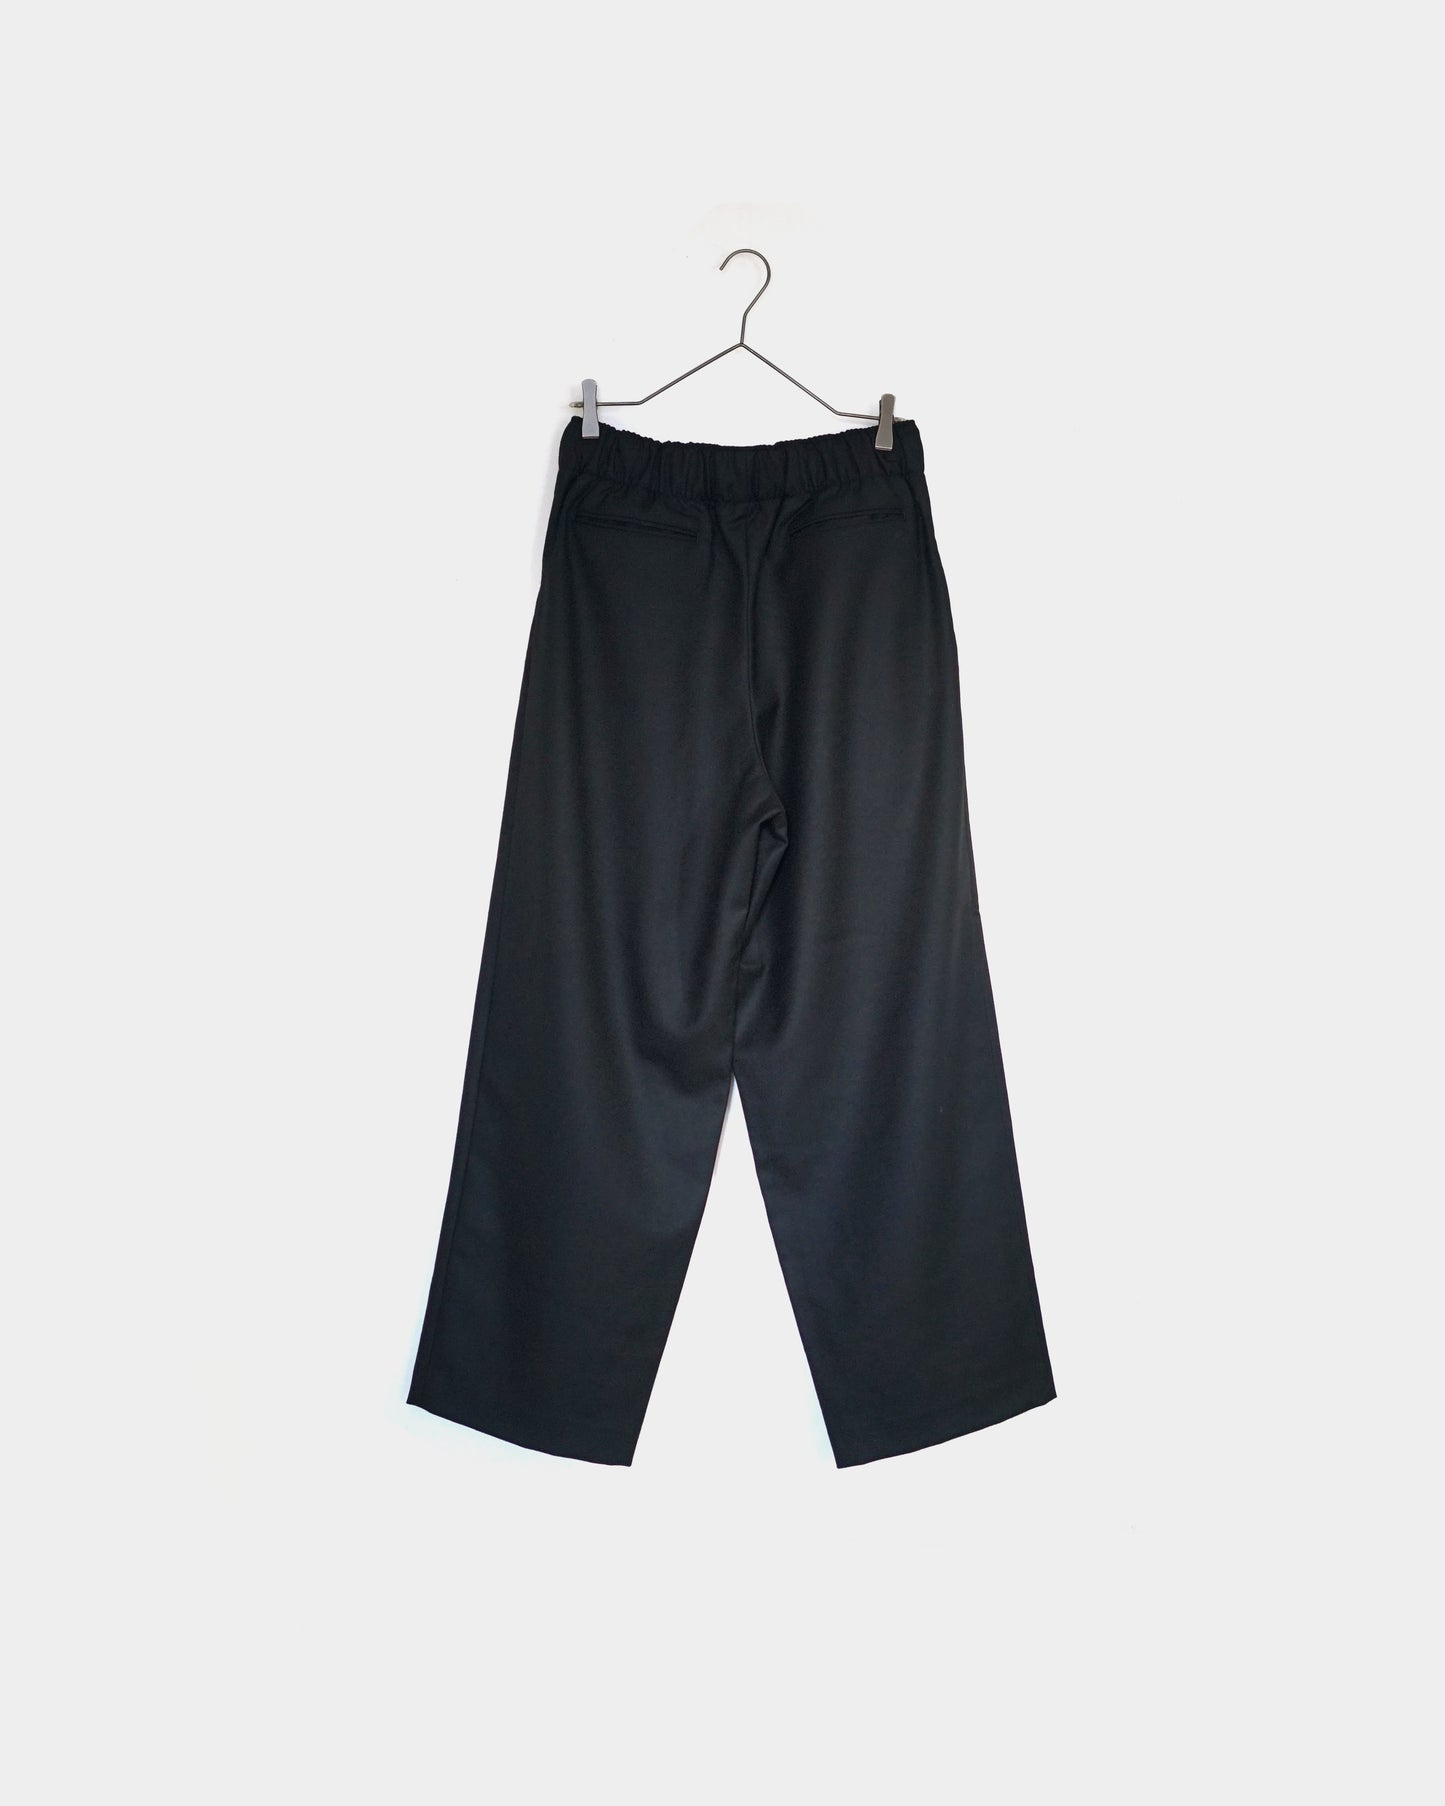 REVERBERATE  / BELTED TROUSERS TYPE3  "BLACK"